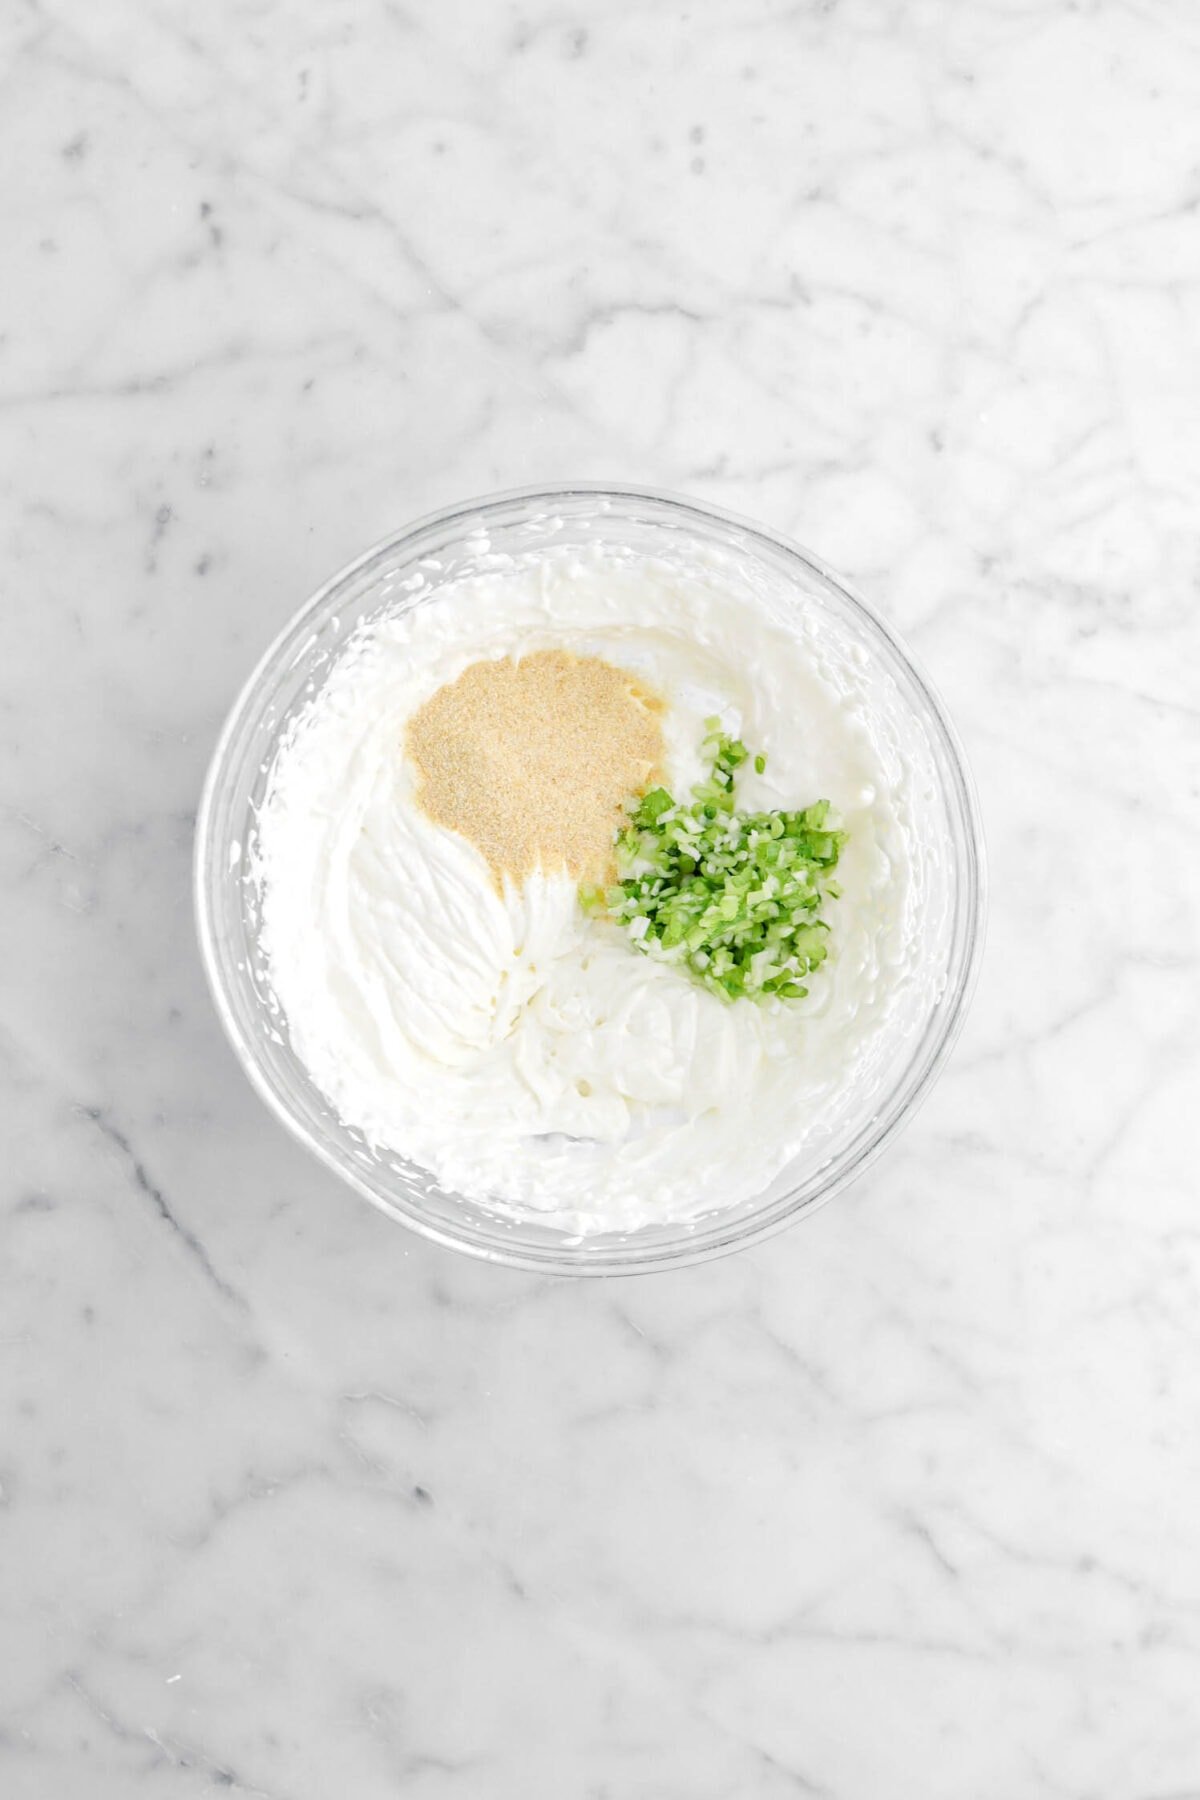 garlic powder, green onions, and whipped sour cream in glass bowl